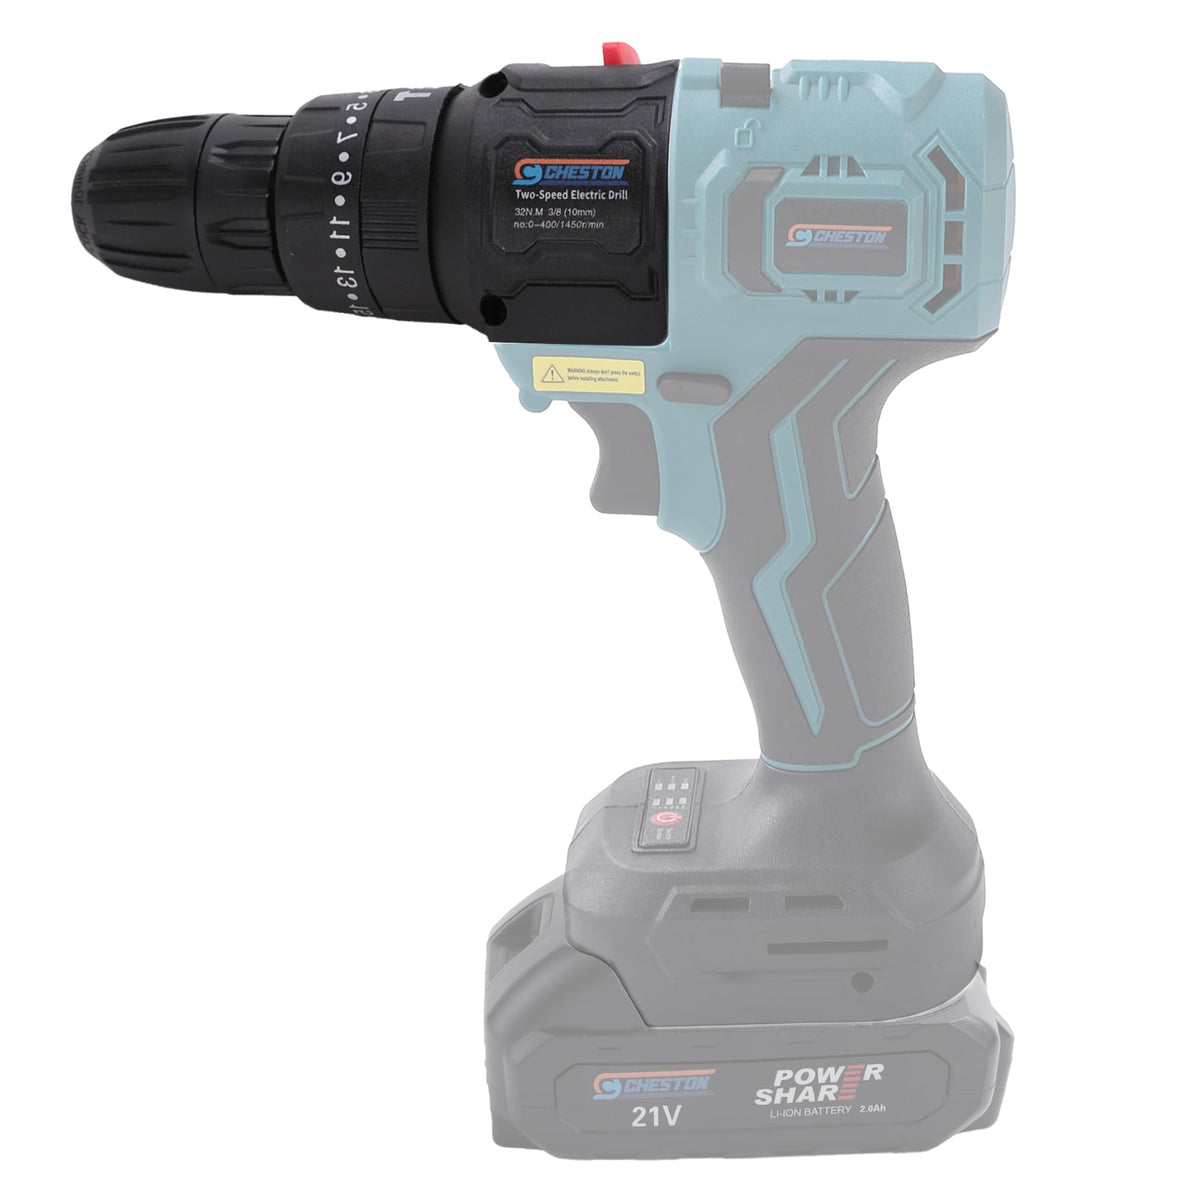 Cheston One 21V 10mm Two Speed Drill Attachment Power Tool | 1500 RPM | 32NM Torque (25+1) for Drilling Wood, Walls, Metal (Battery & Charger Not Included)